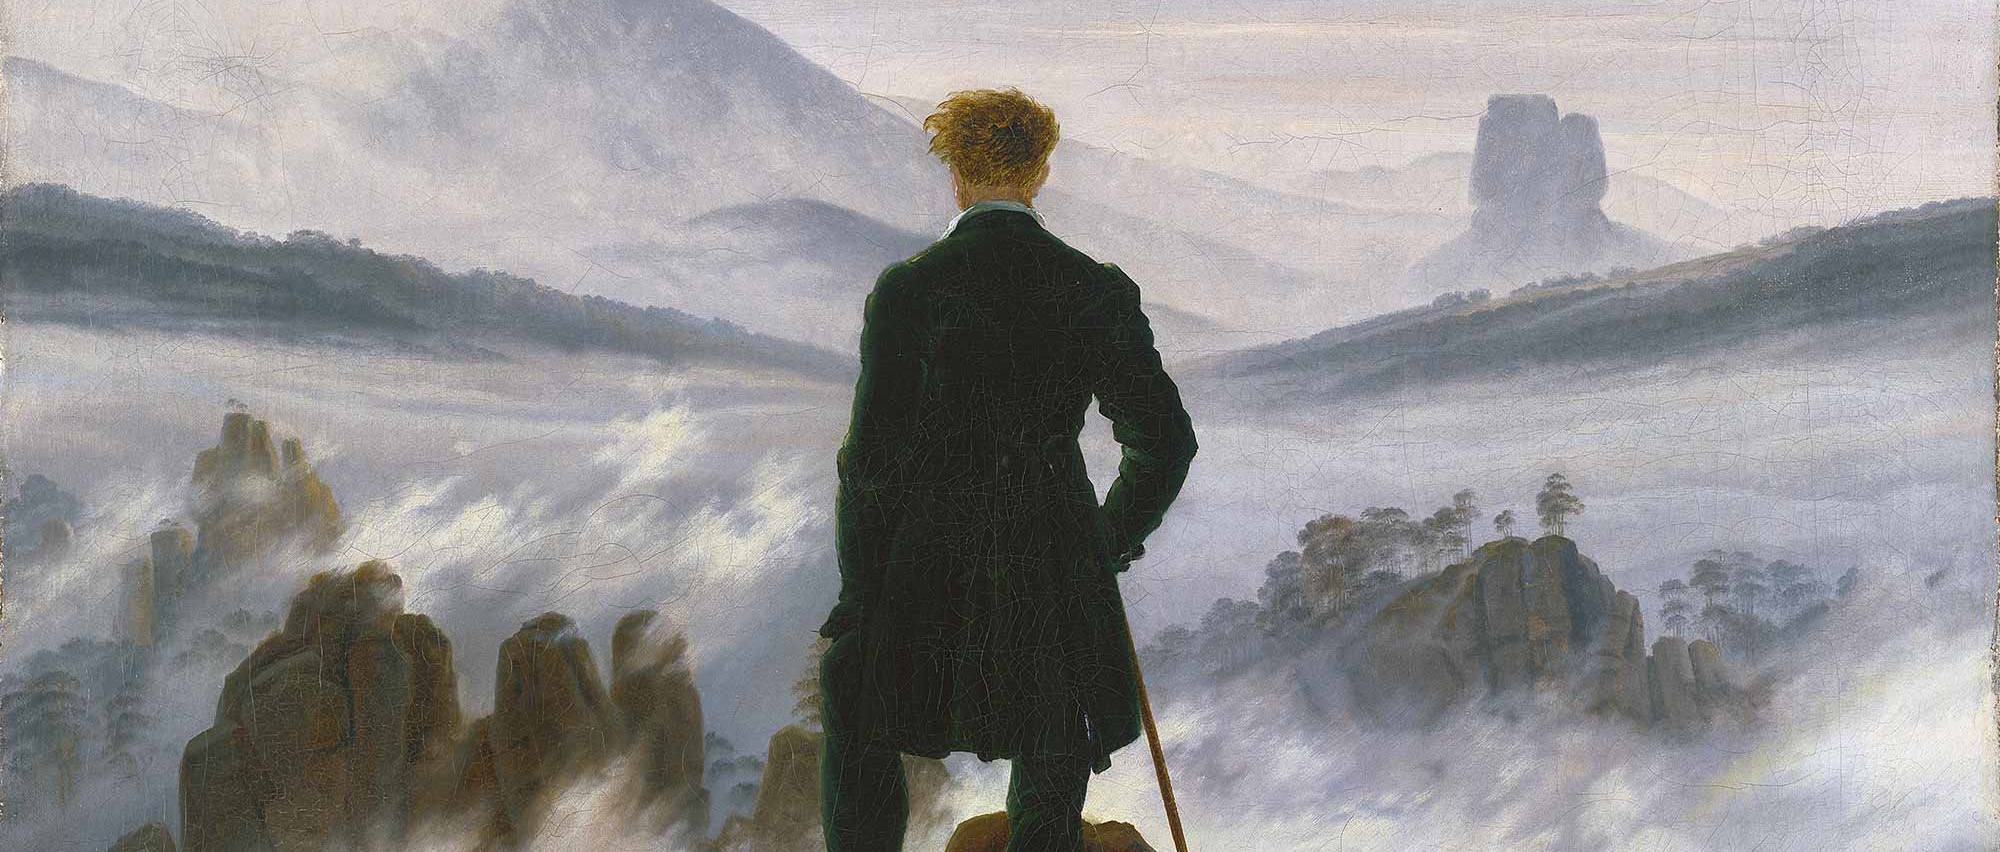 By Caspar David Friedrich - https://www.tiqets.com/ja/hamburg-attractions-c64886/tickets-for-hamburger-kunsthalle-skip-the-line-p976728/, Public Domain, https://commons.wikimedia.org/w/index.php?curid=127245432